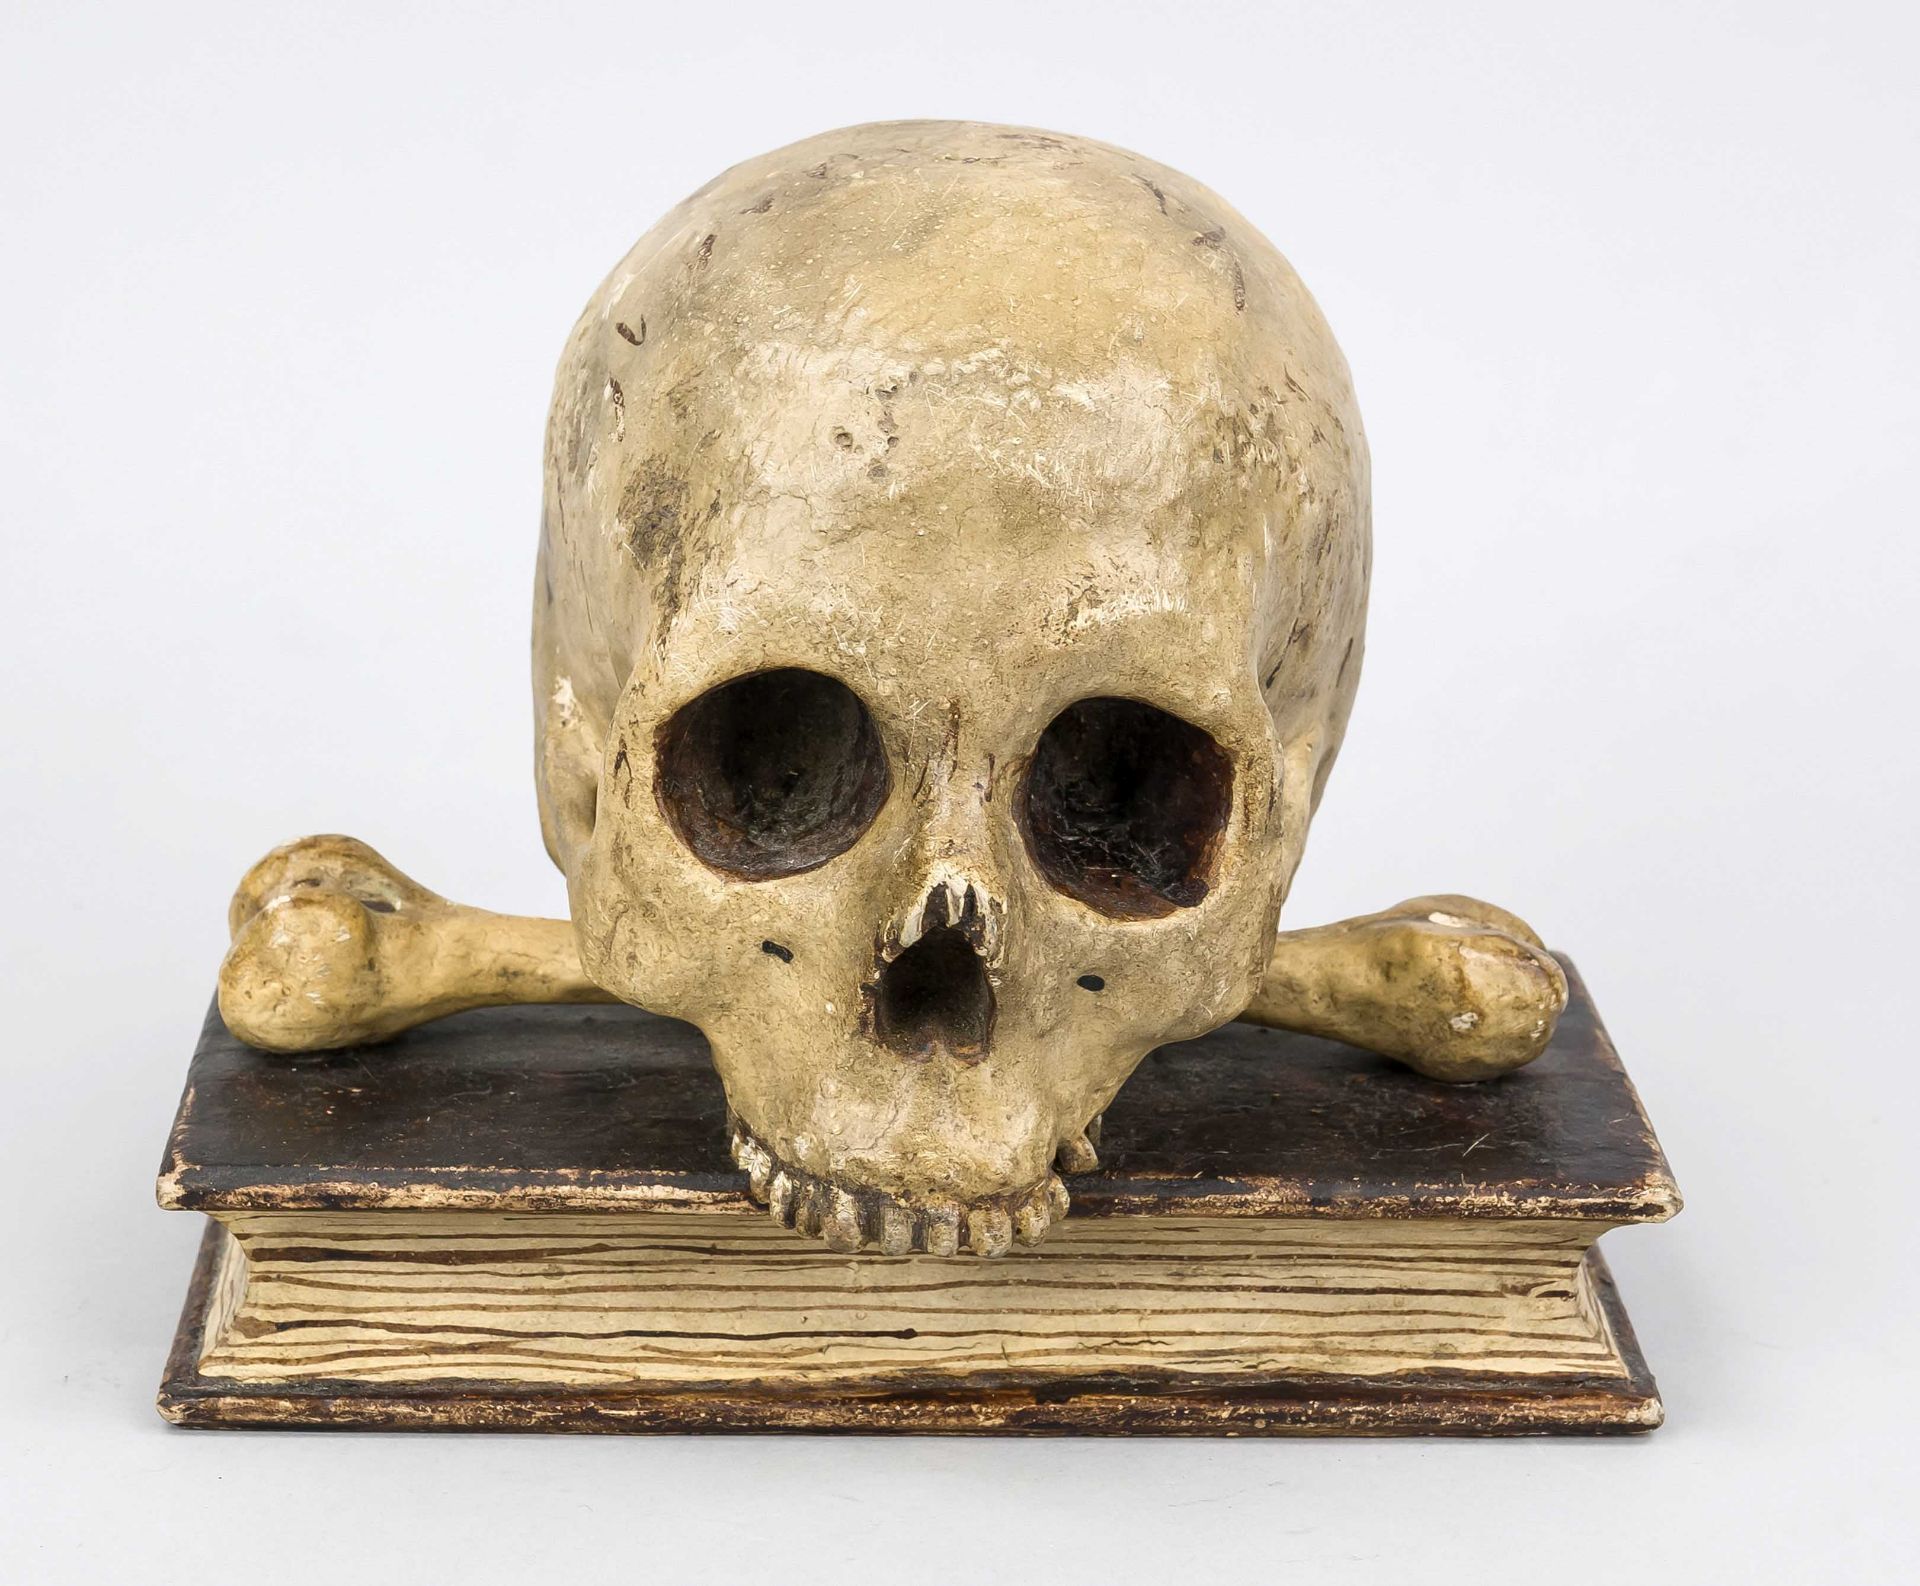 Memento Mori object, 19th century, probably carved limewood and polychrome painted. Slightly